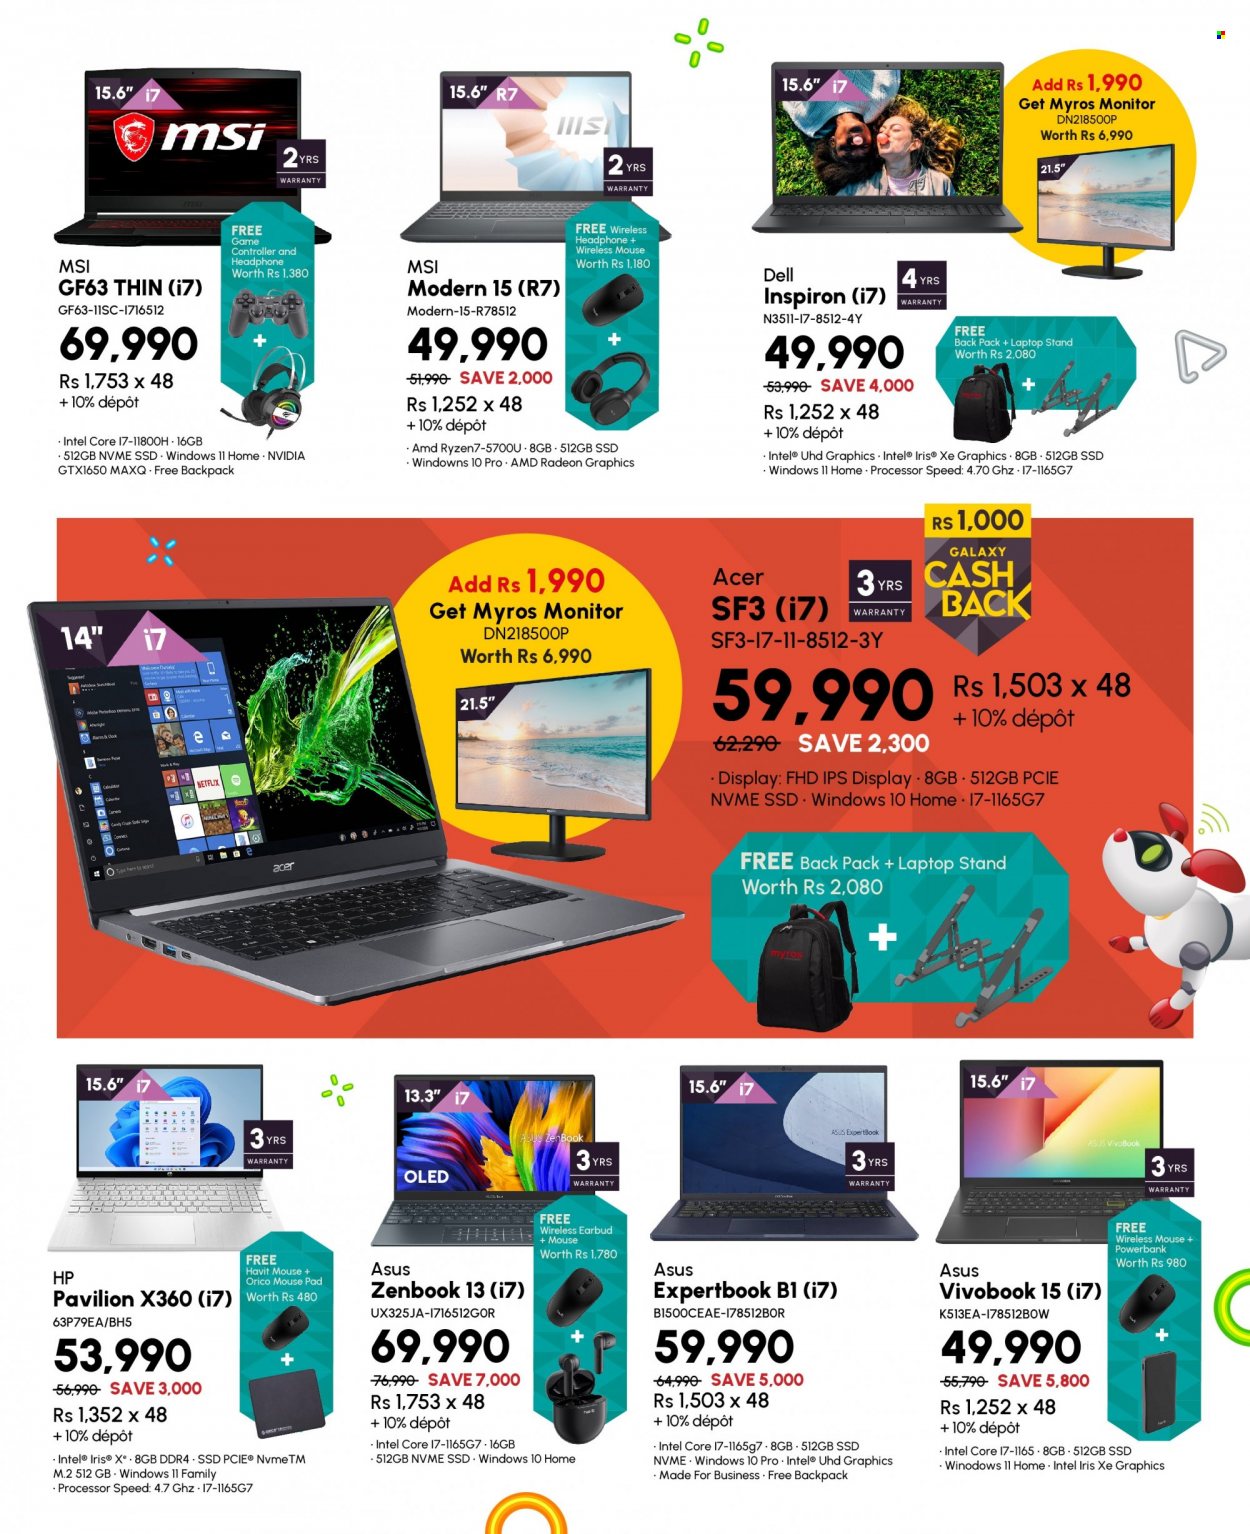 Galaxy Catalogue - 27.07.2022 - 15.08.2022 - Sales products - Havit, Intel, Acer, Hewlett Packard, power bank, laptop, Inspiron, MSI, mouse, Radeon, mouse pad, AMD Radeon, headphones, backpack, Asus, Dell, monitor. Page 5.